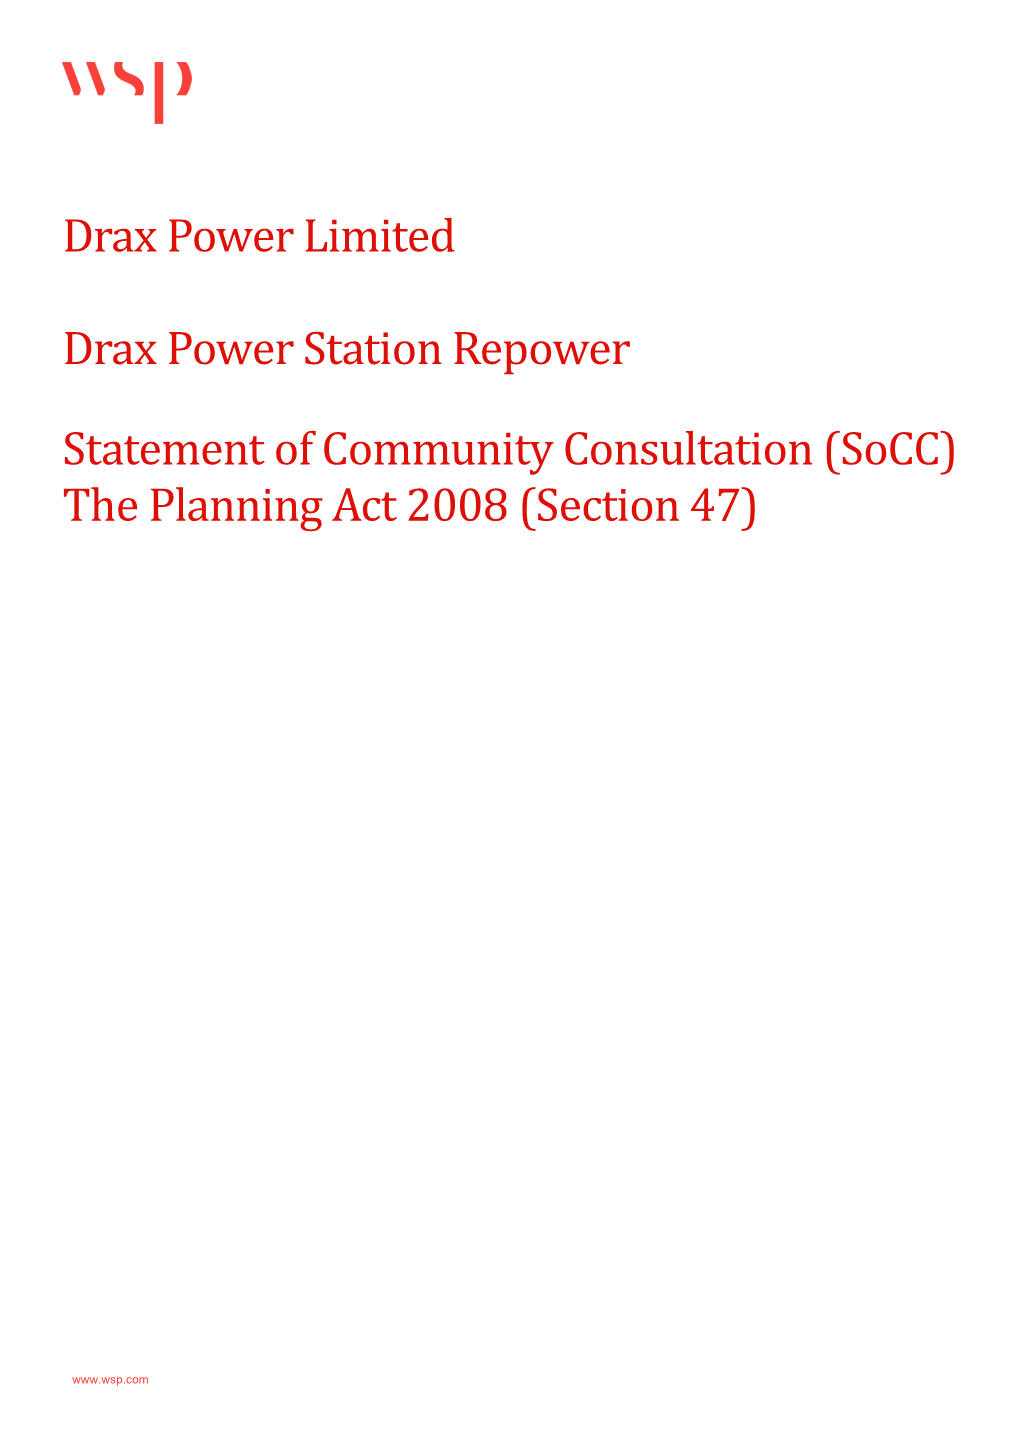 Socc) the Planning Act 2008 (Section 47)